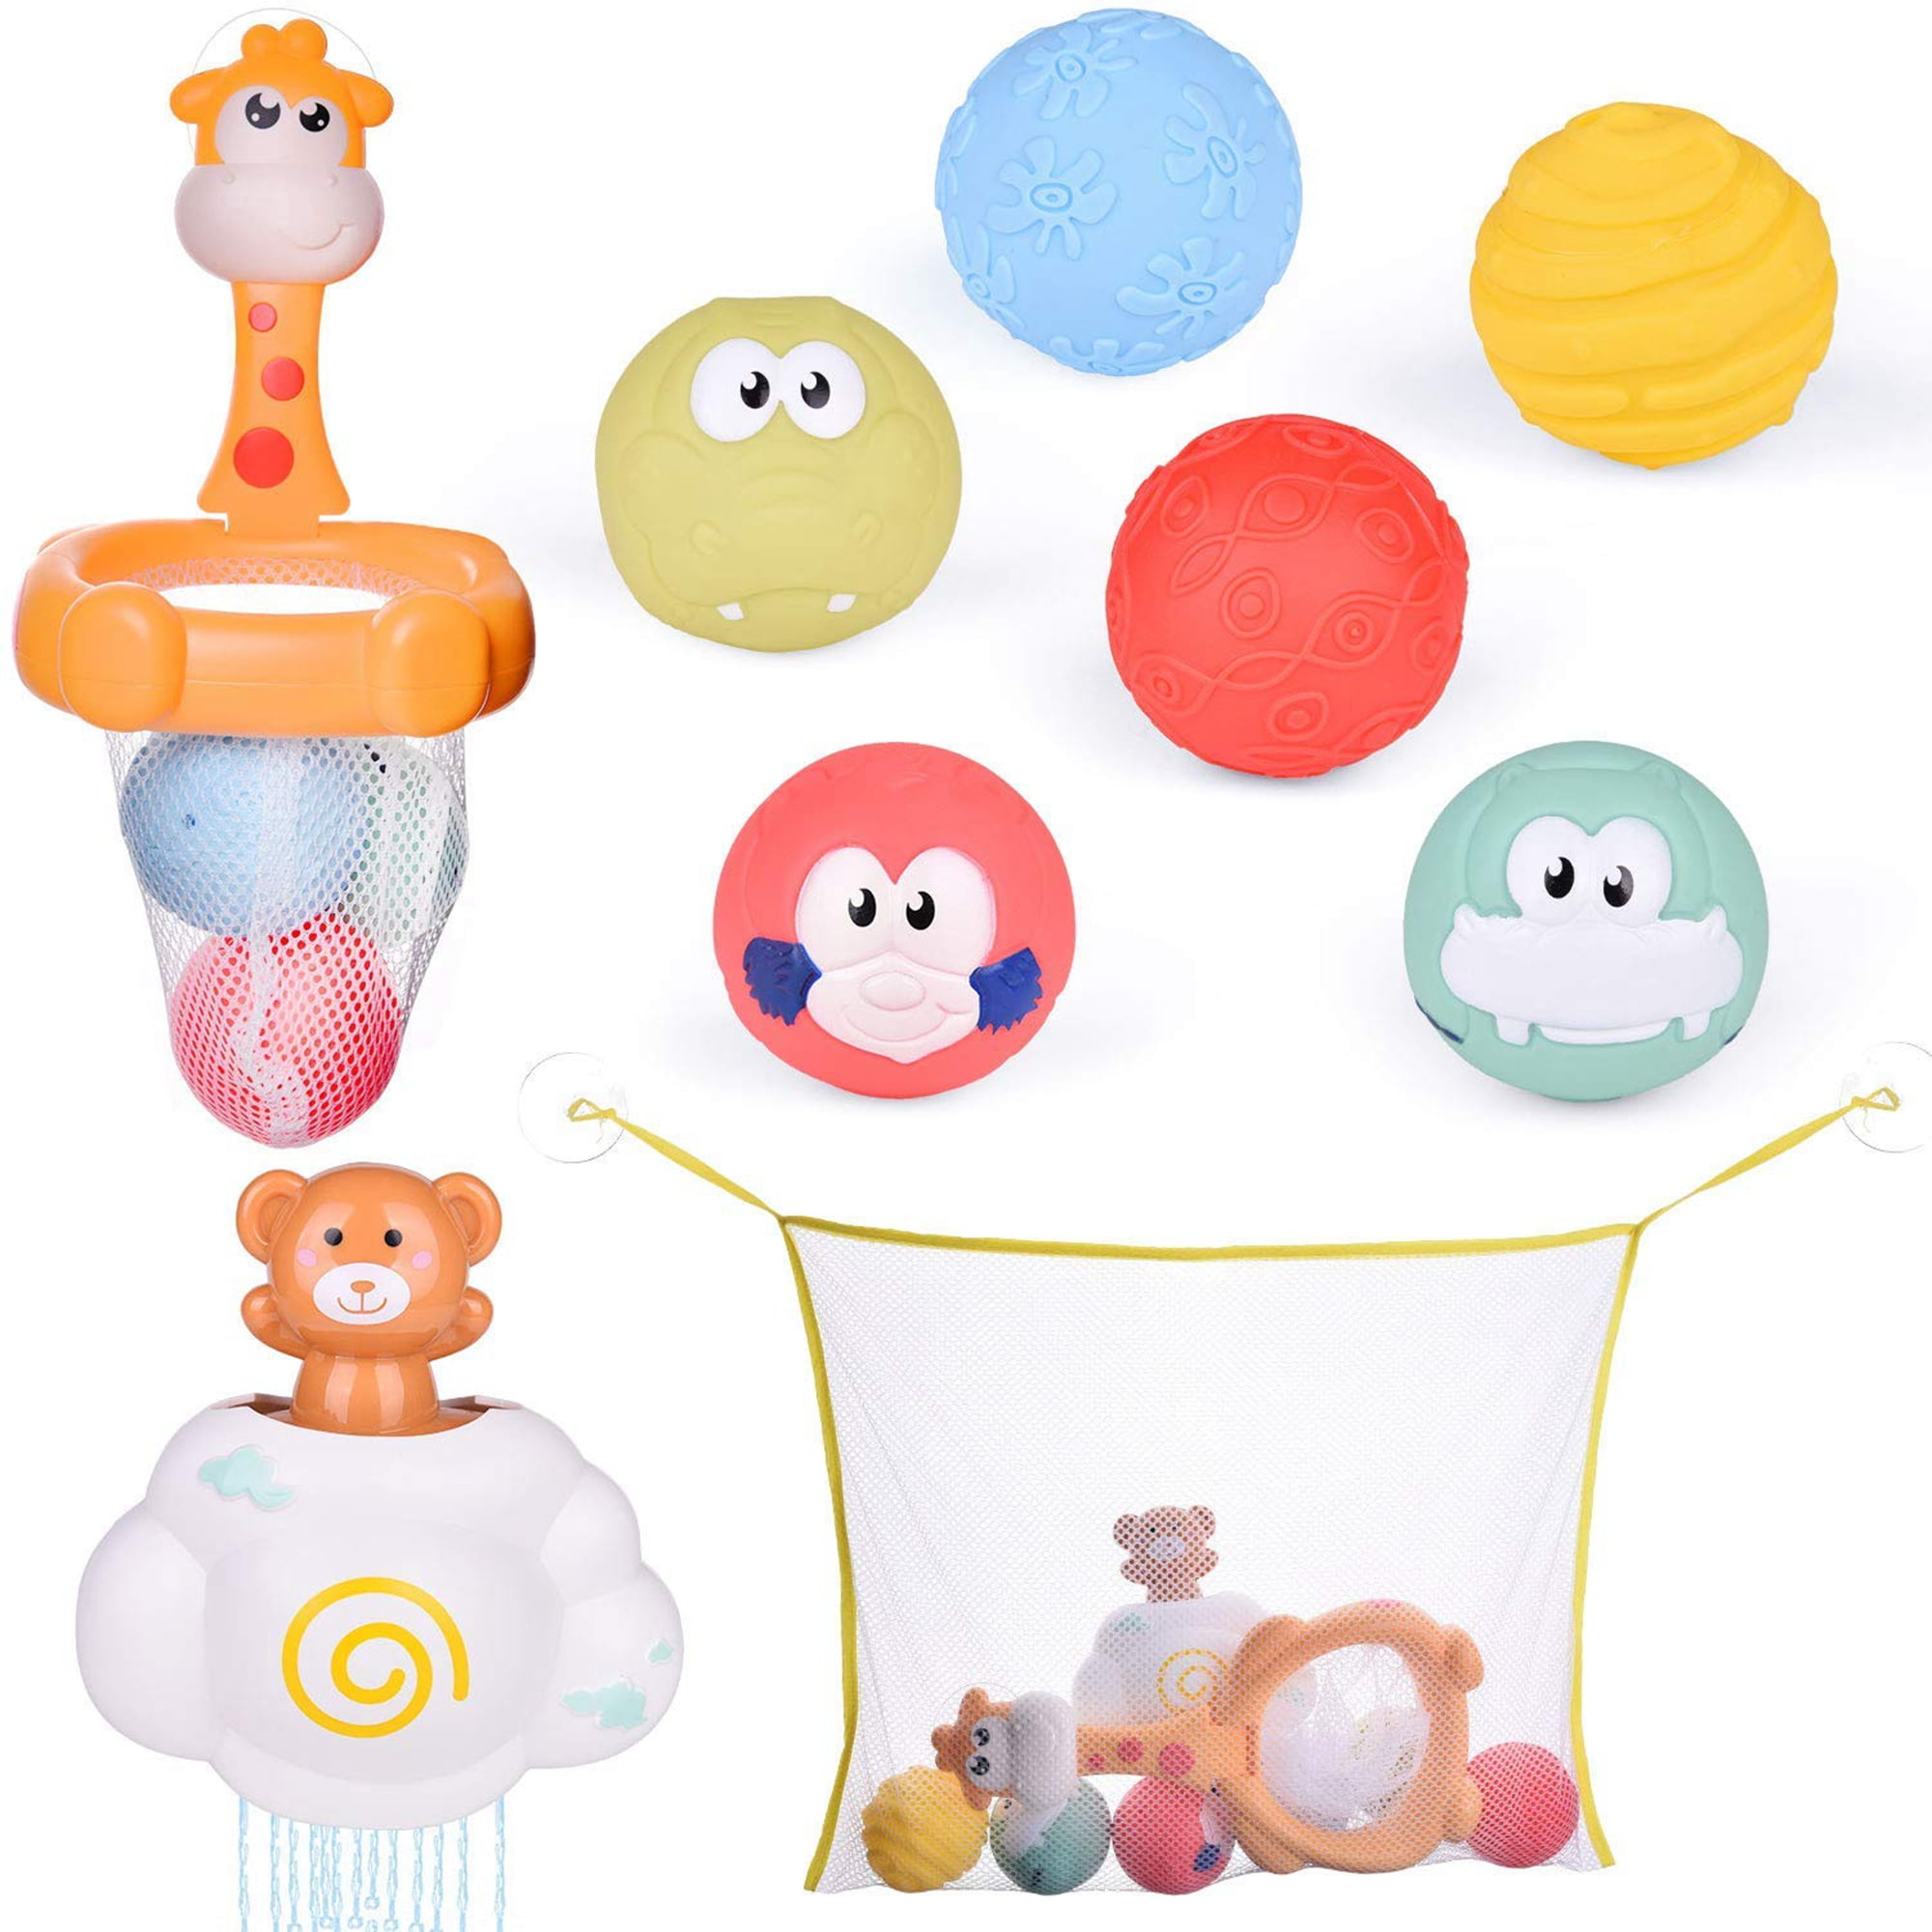 New Mickey Mouse Disney Baby Bath Toy  Floating balls BasketBall Hoop Suctions 